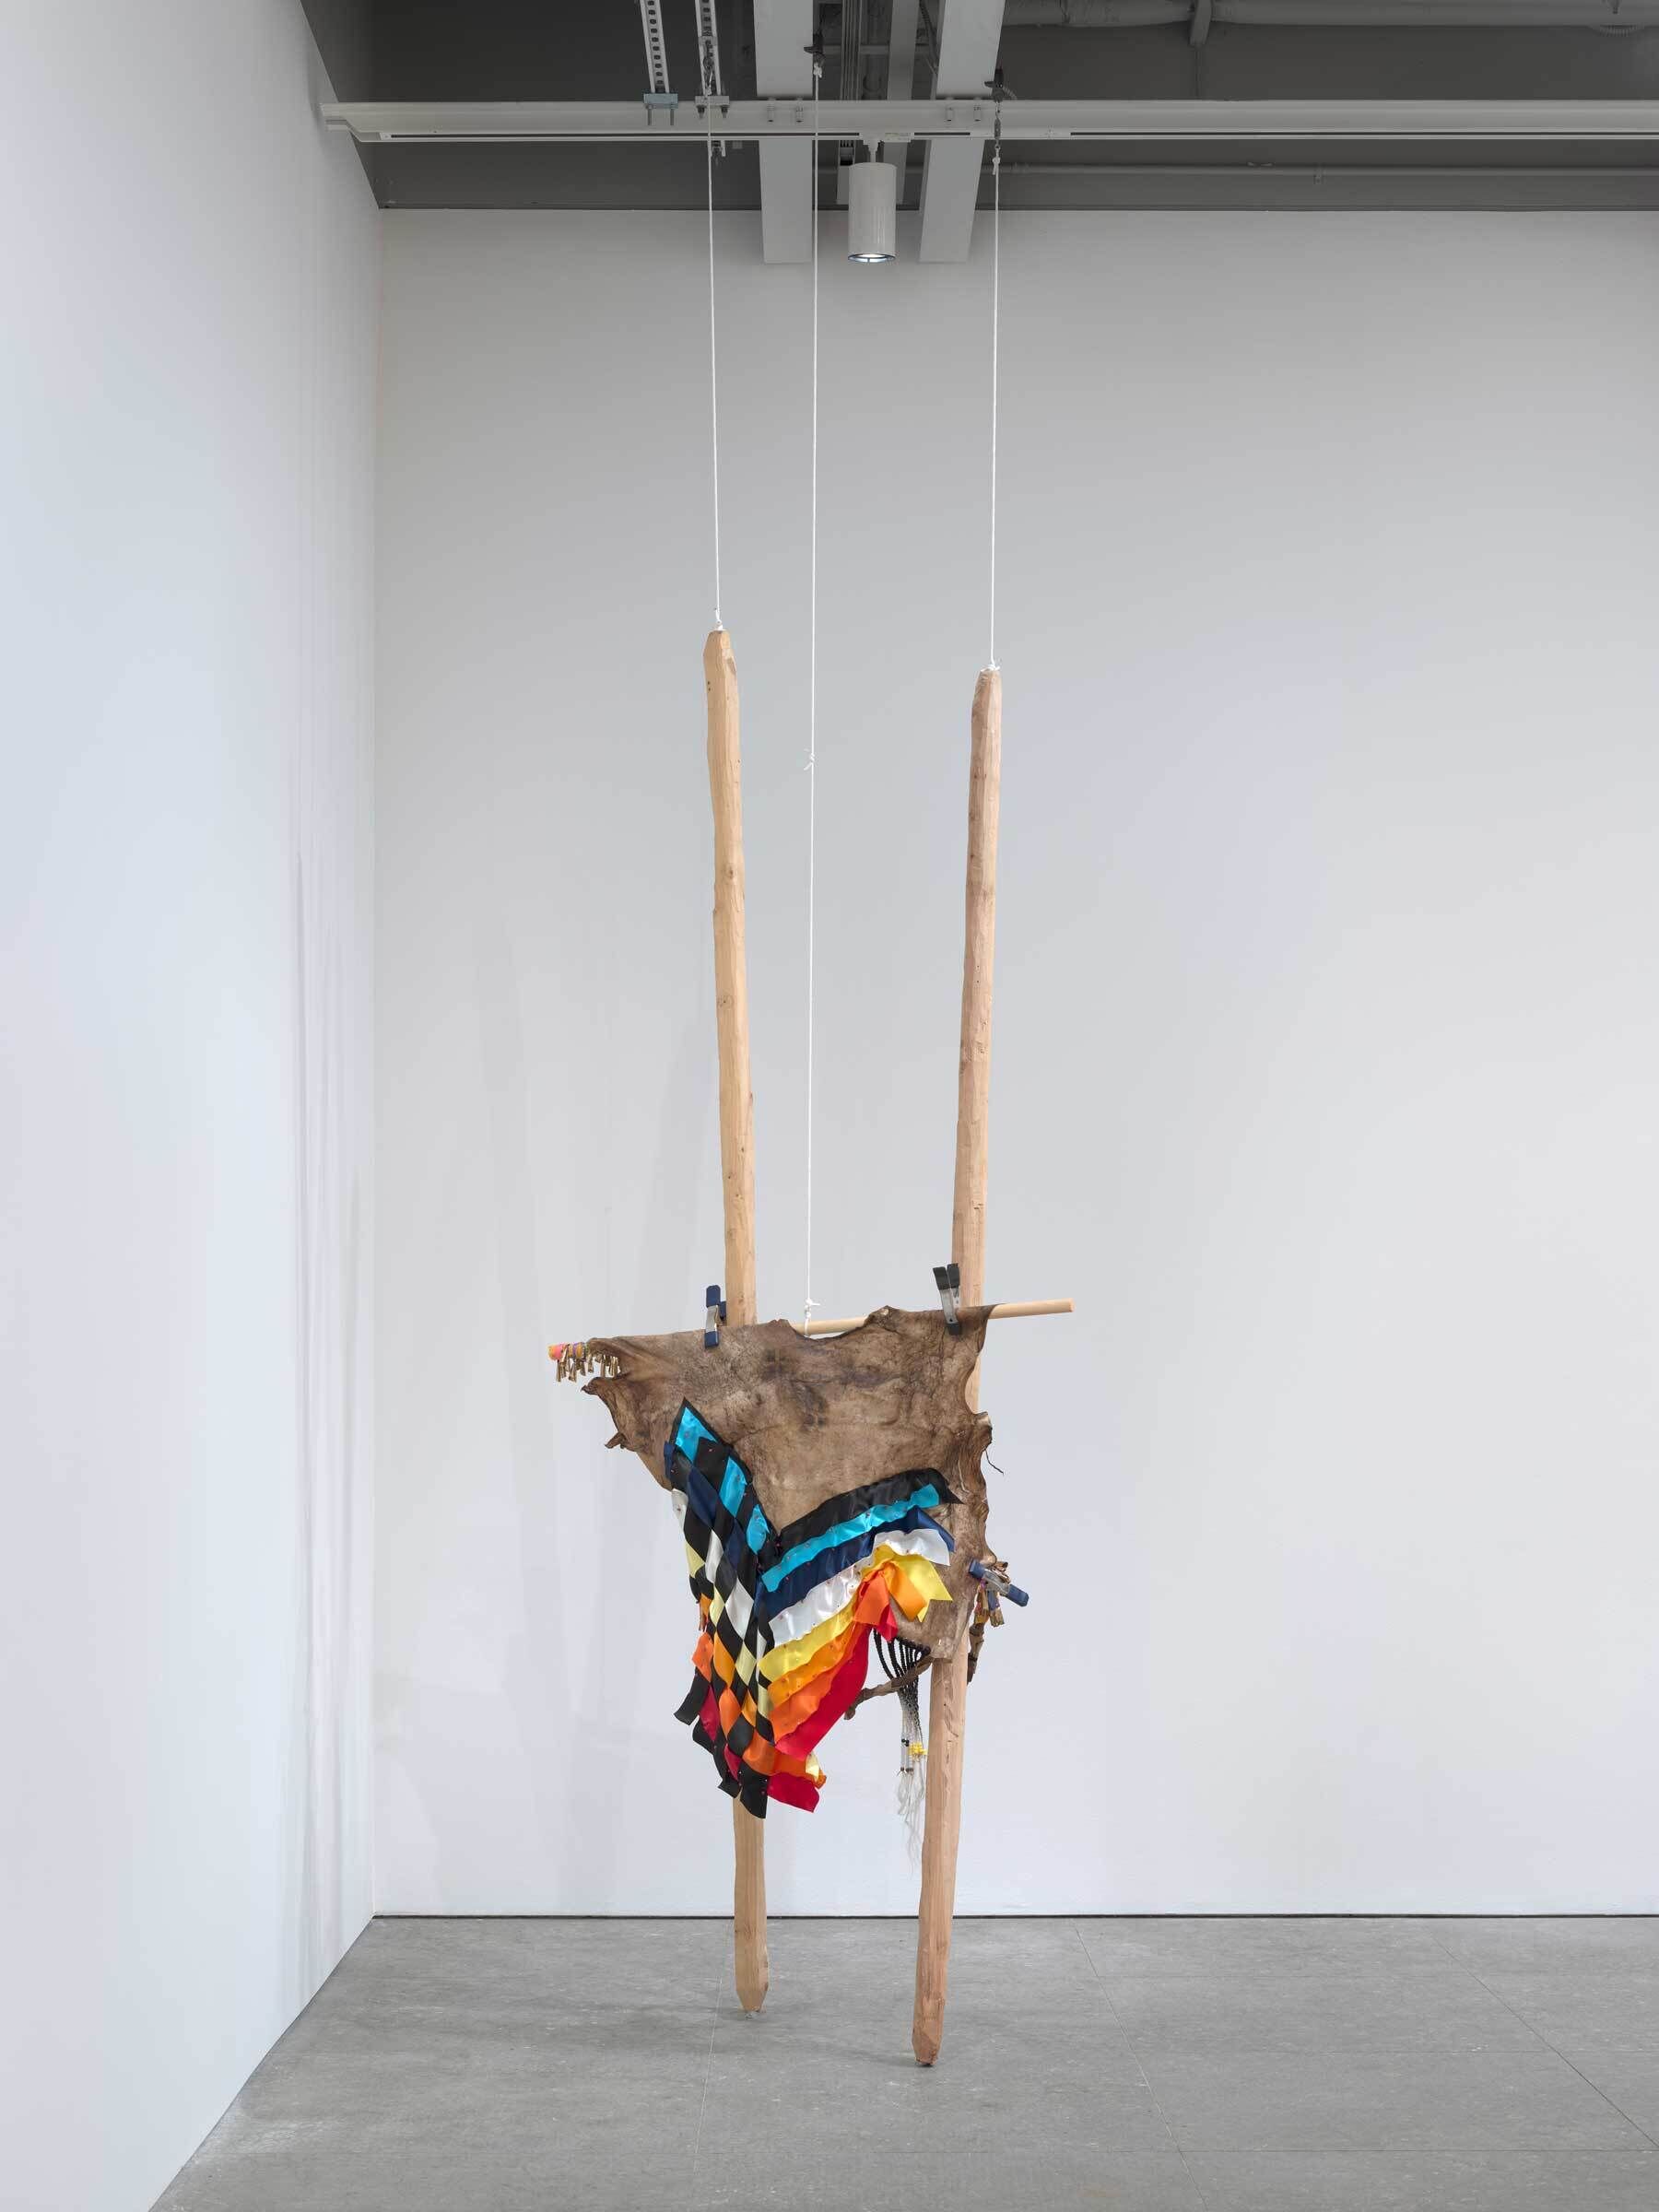 Modern art installation with colorful fabrics hanging from a wooden structure suspended by ropes in a white gallery space.